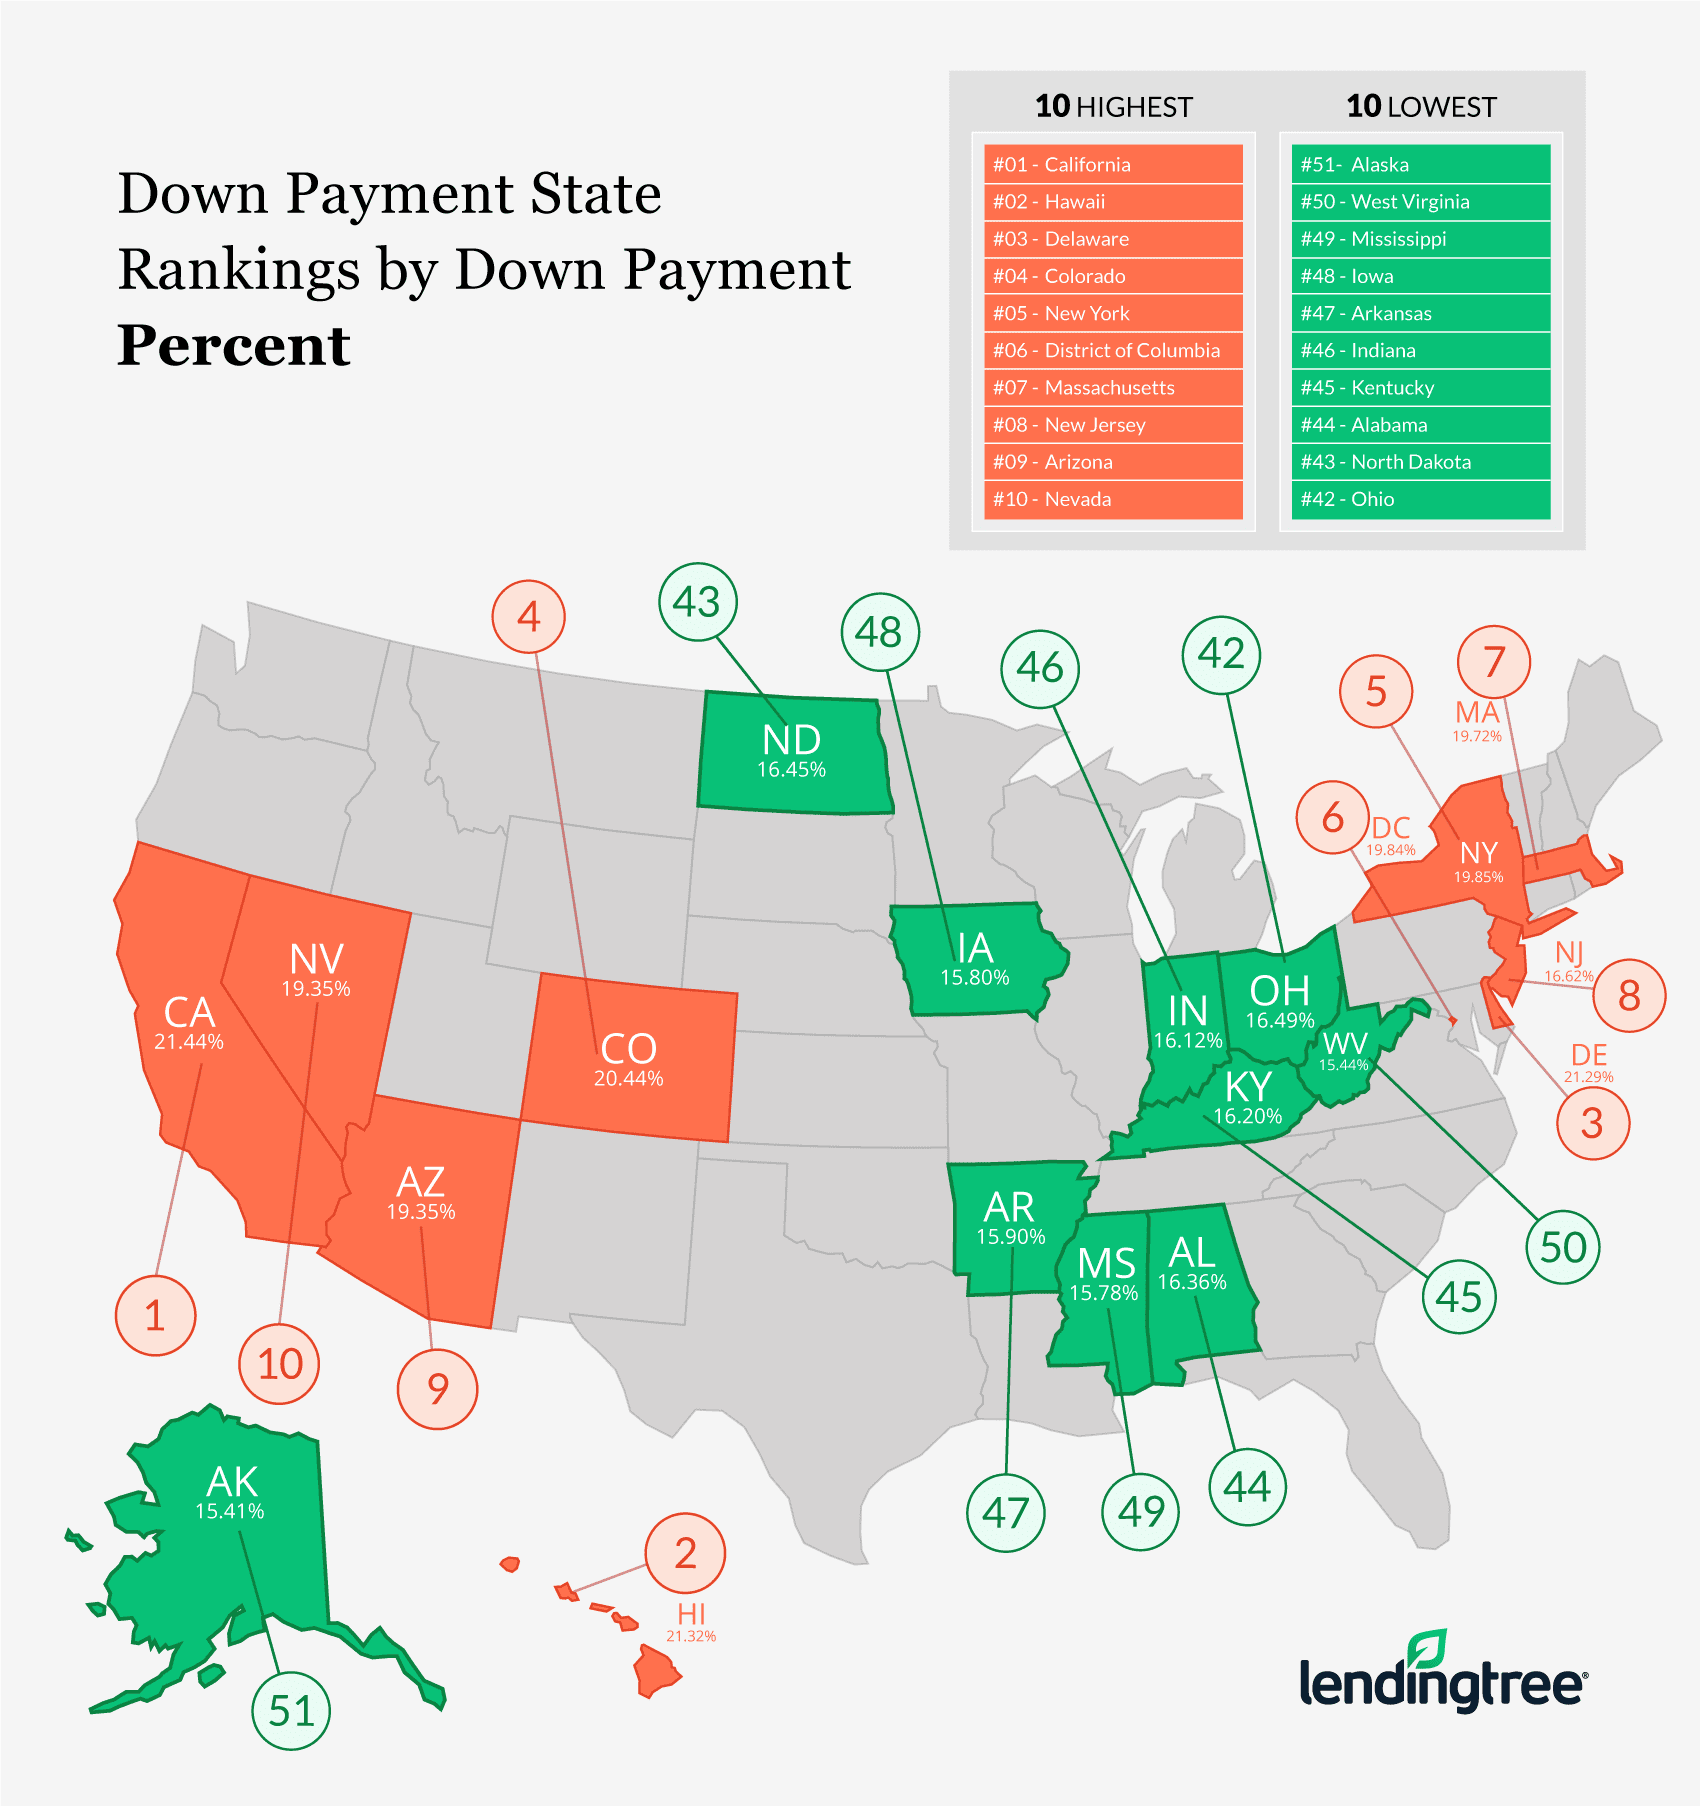 While the average downpayment fell during the third quarter, some states have a lower average than others.